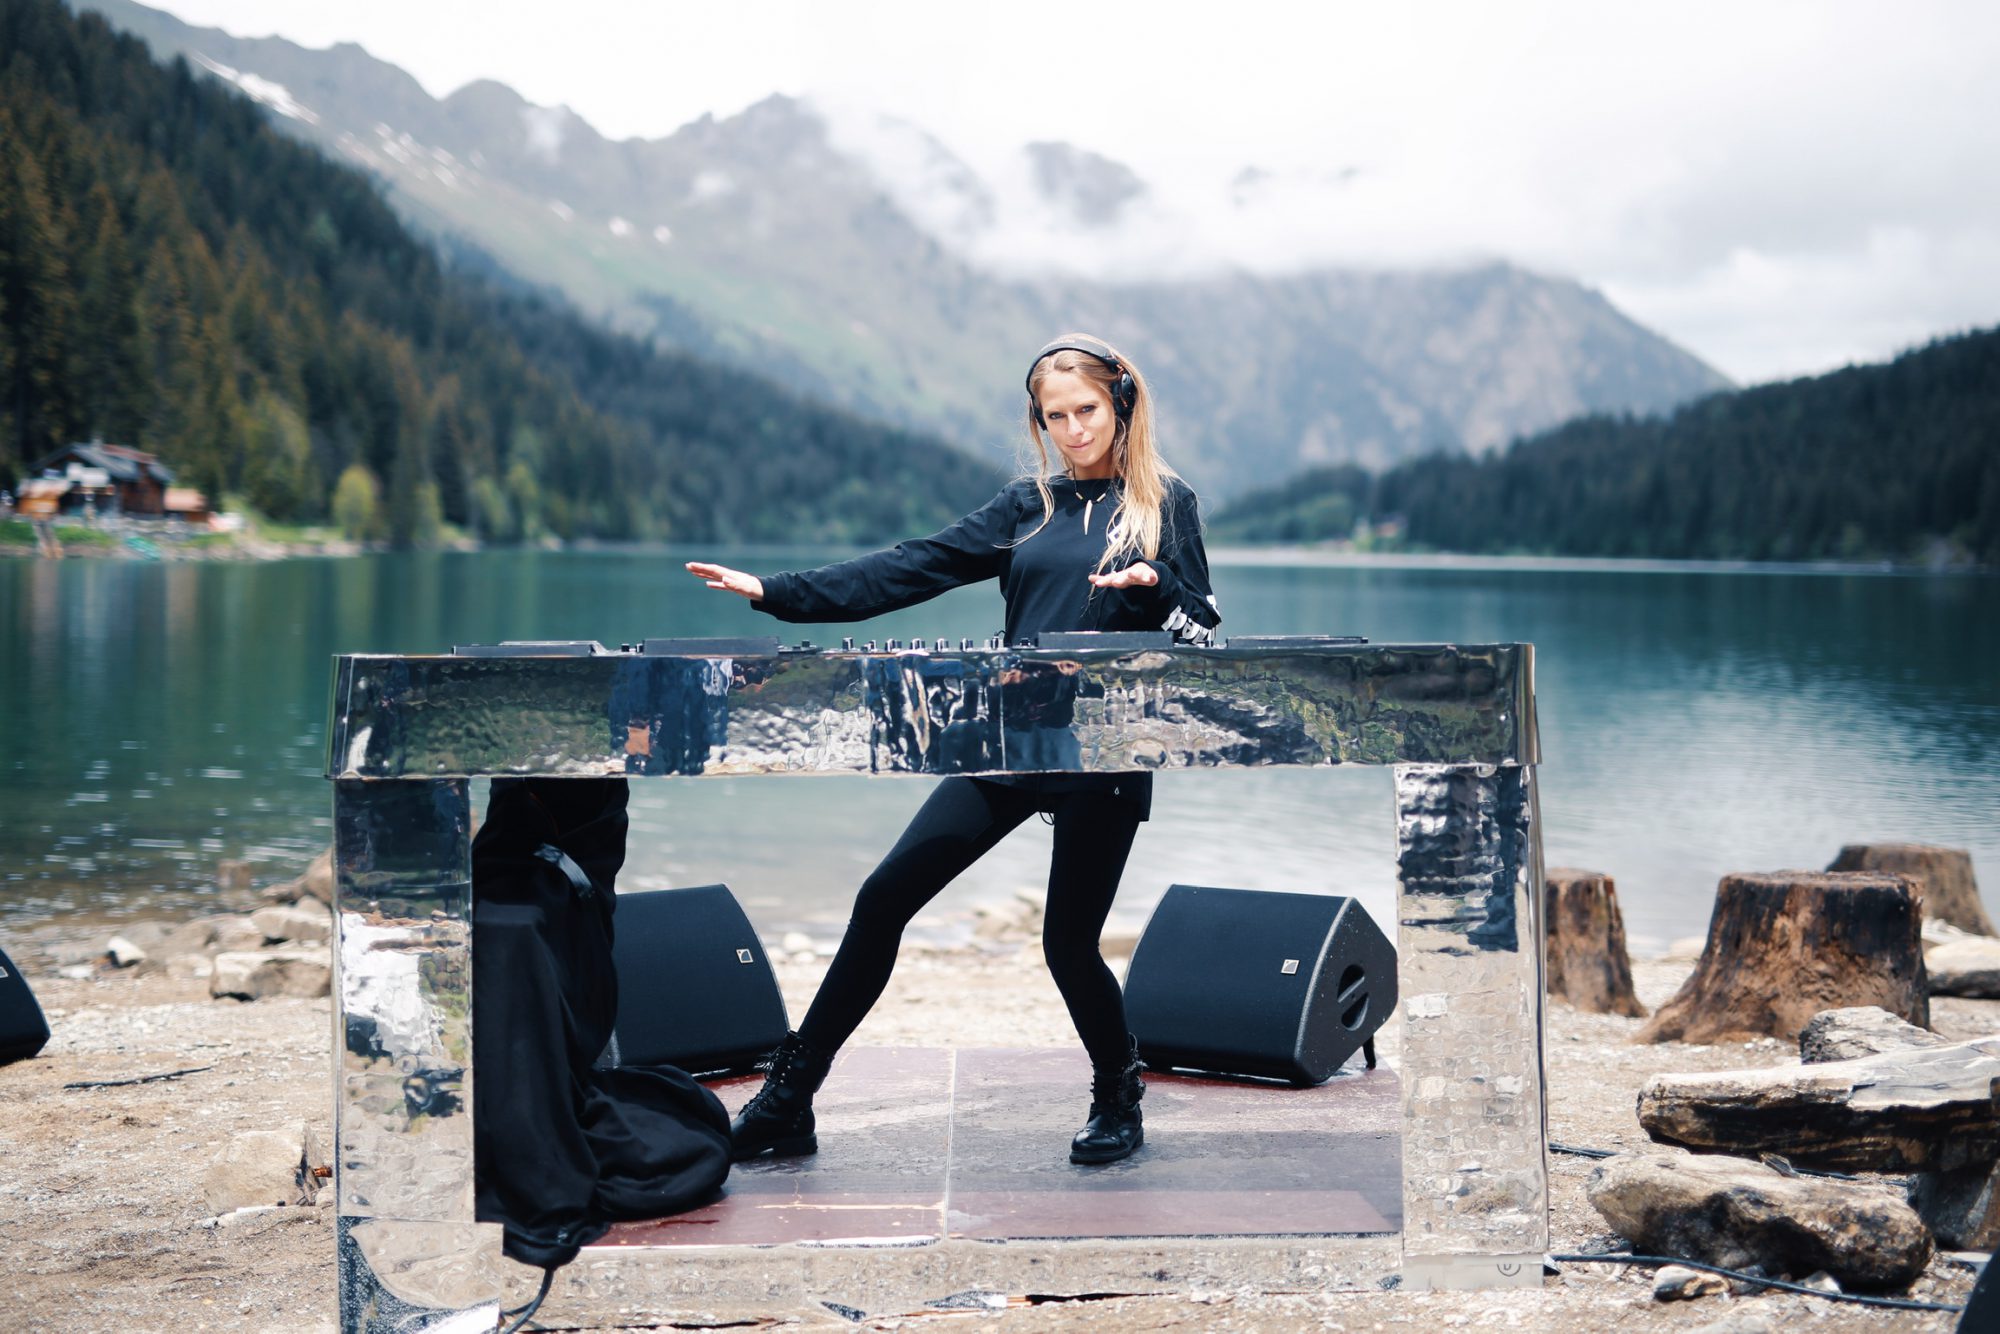 Nora En Pure at Gstaad for Beatport